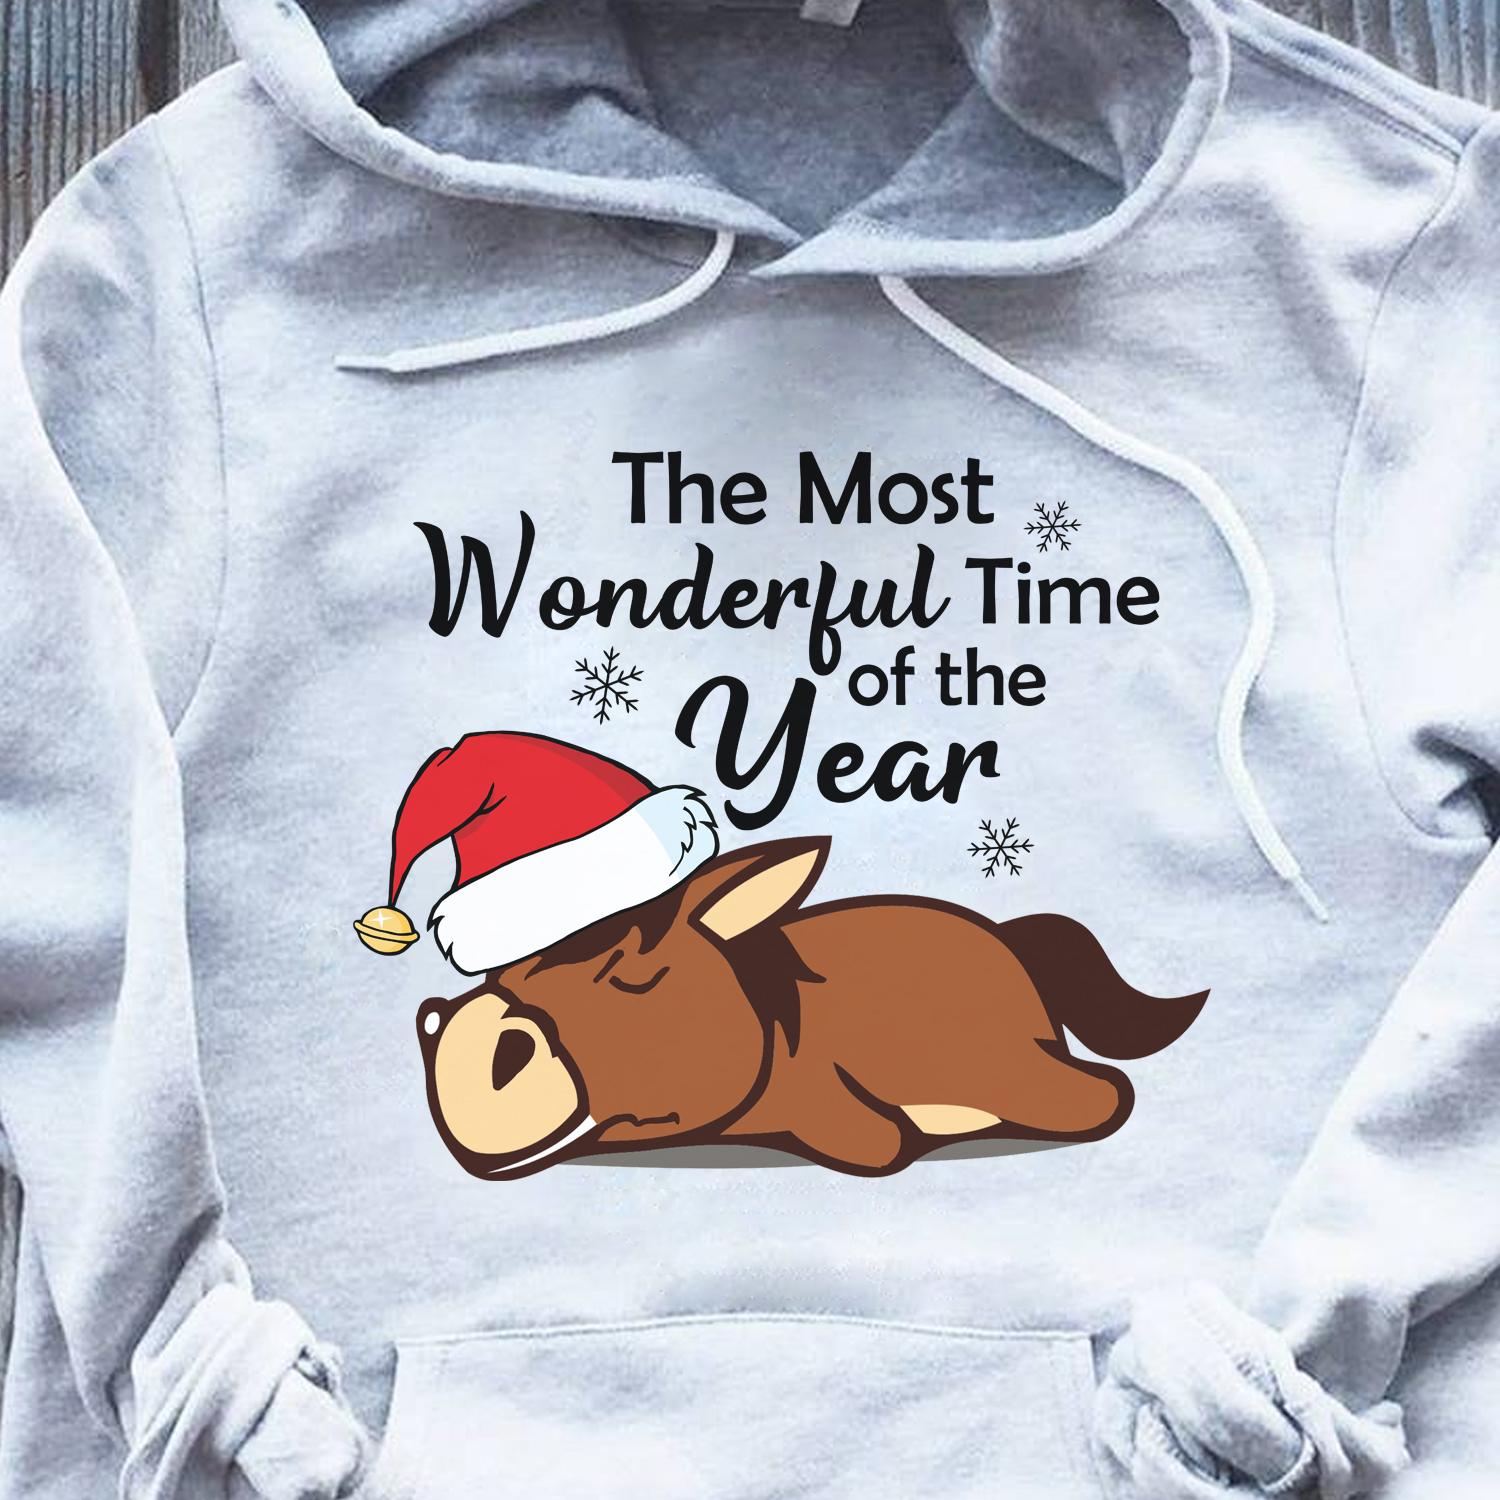 The most wonderful time of the year - Horse wearing Christmas hat, Christmas ugly sweater